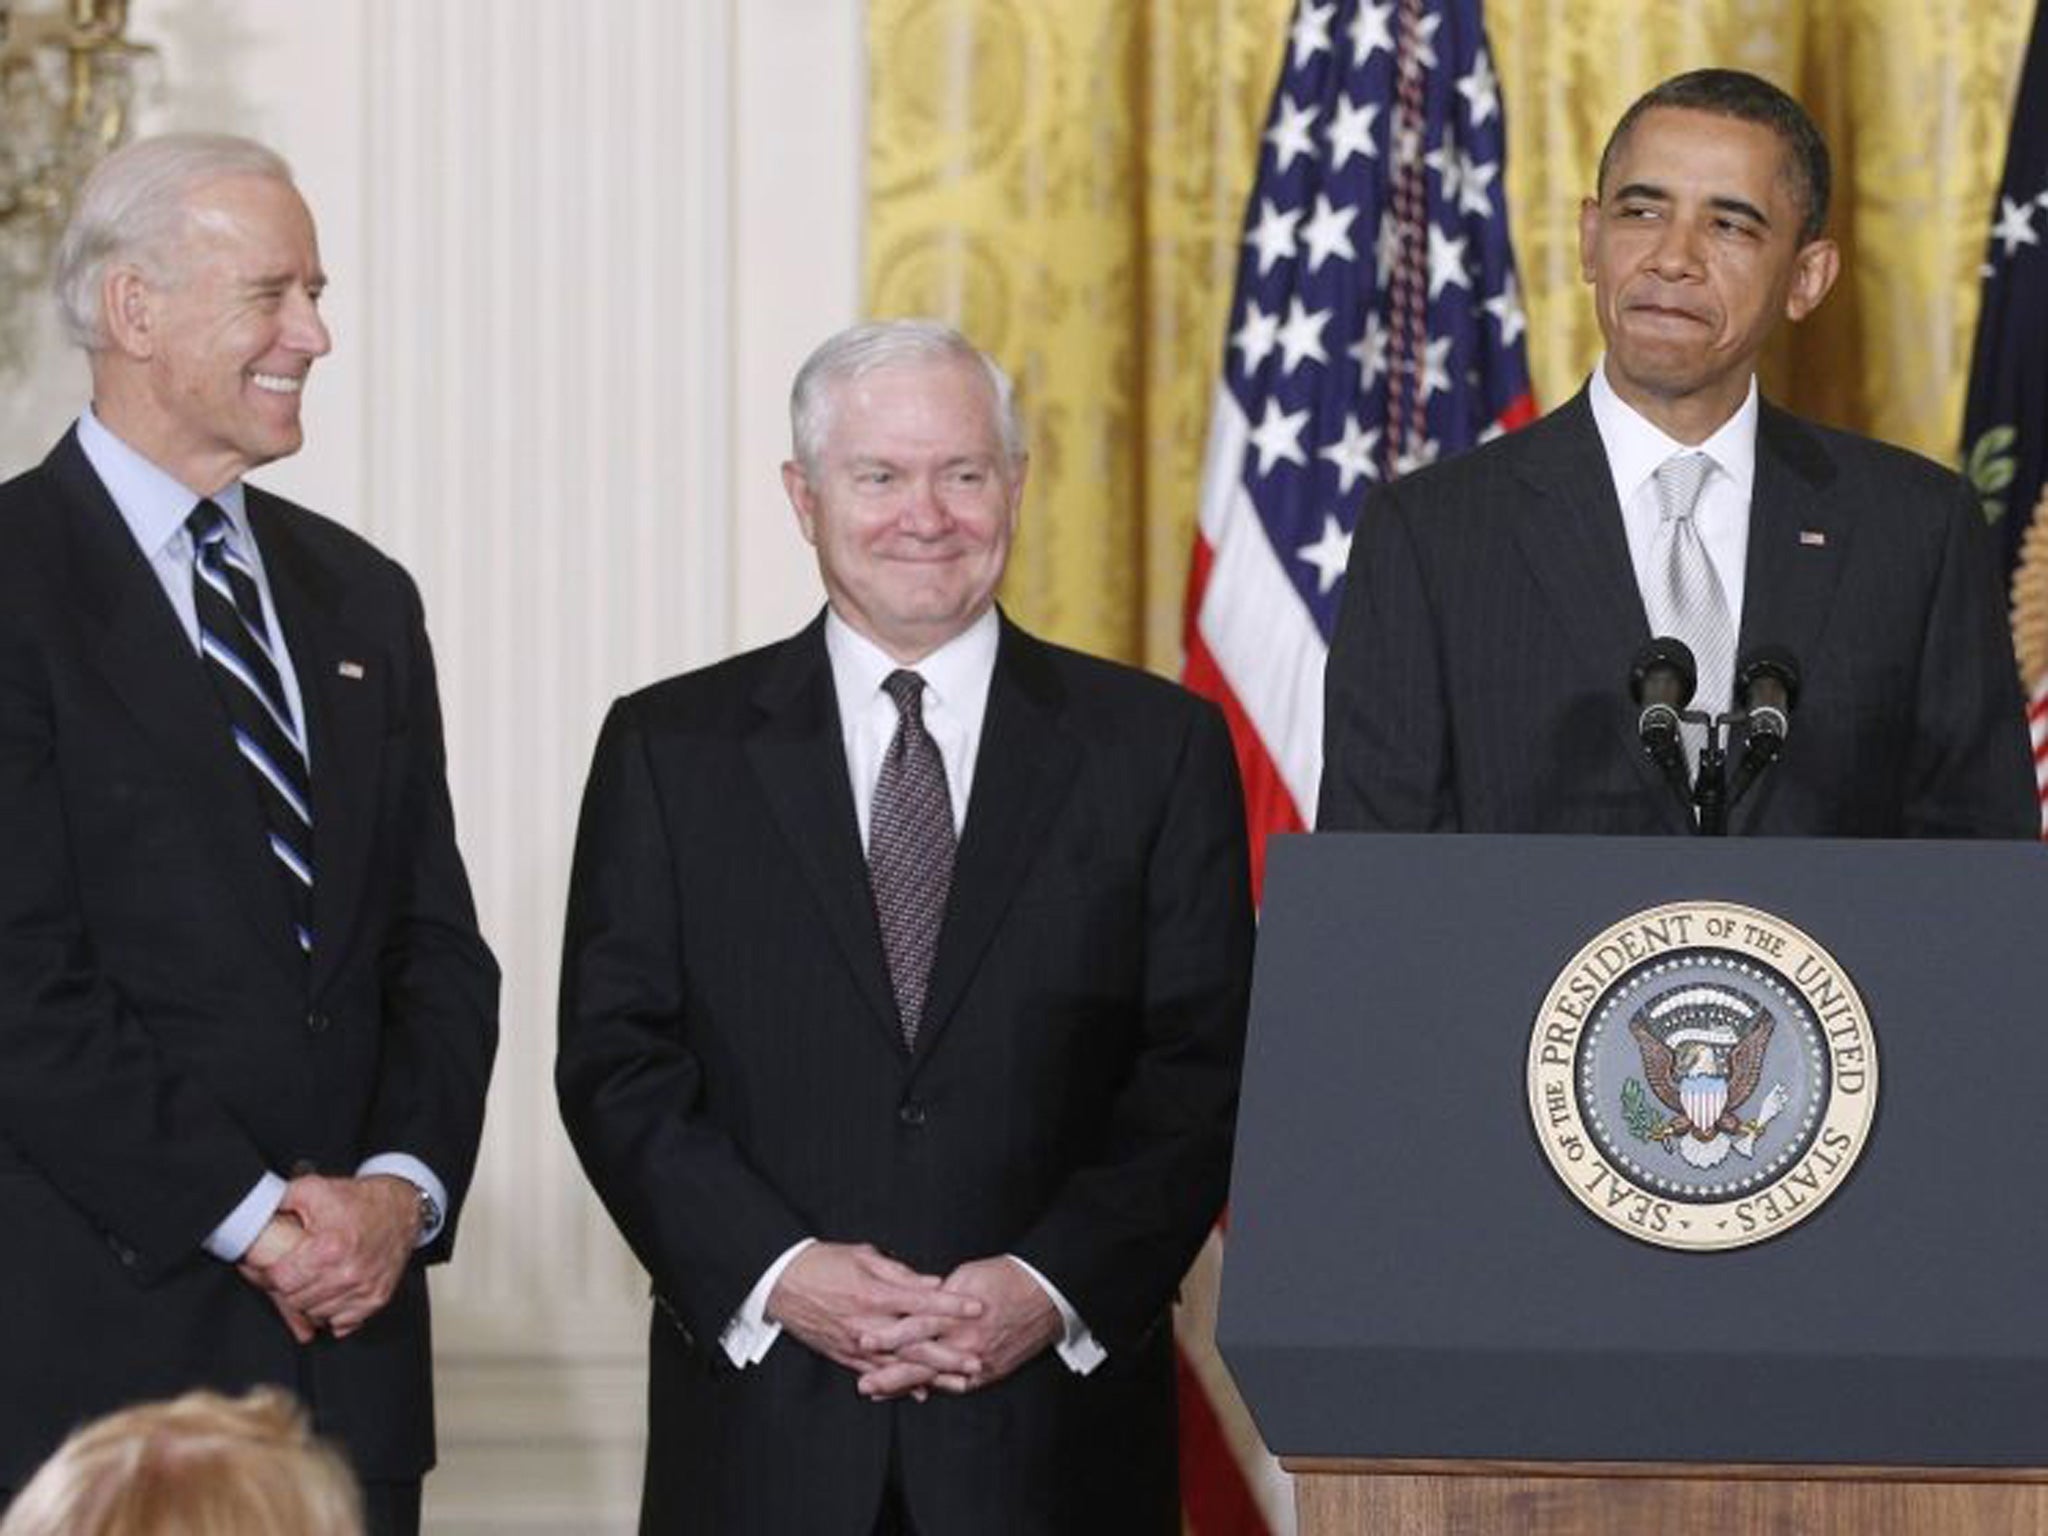 Happier times? April 2011 and President Barack Obama stands in the White House in Washington with Vice President Joe Biden (left) and outgoing Defense Secretary Robert Gates